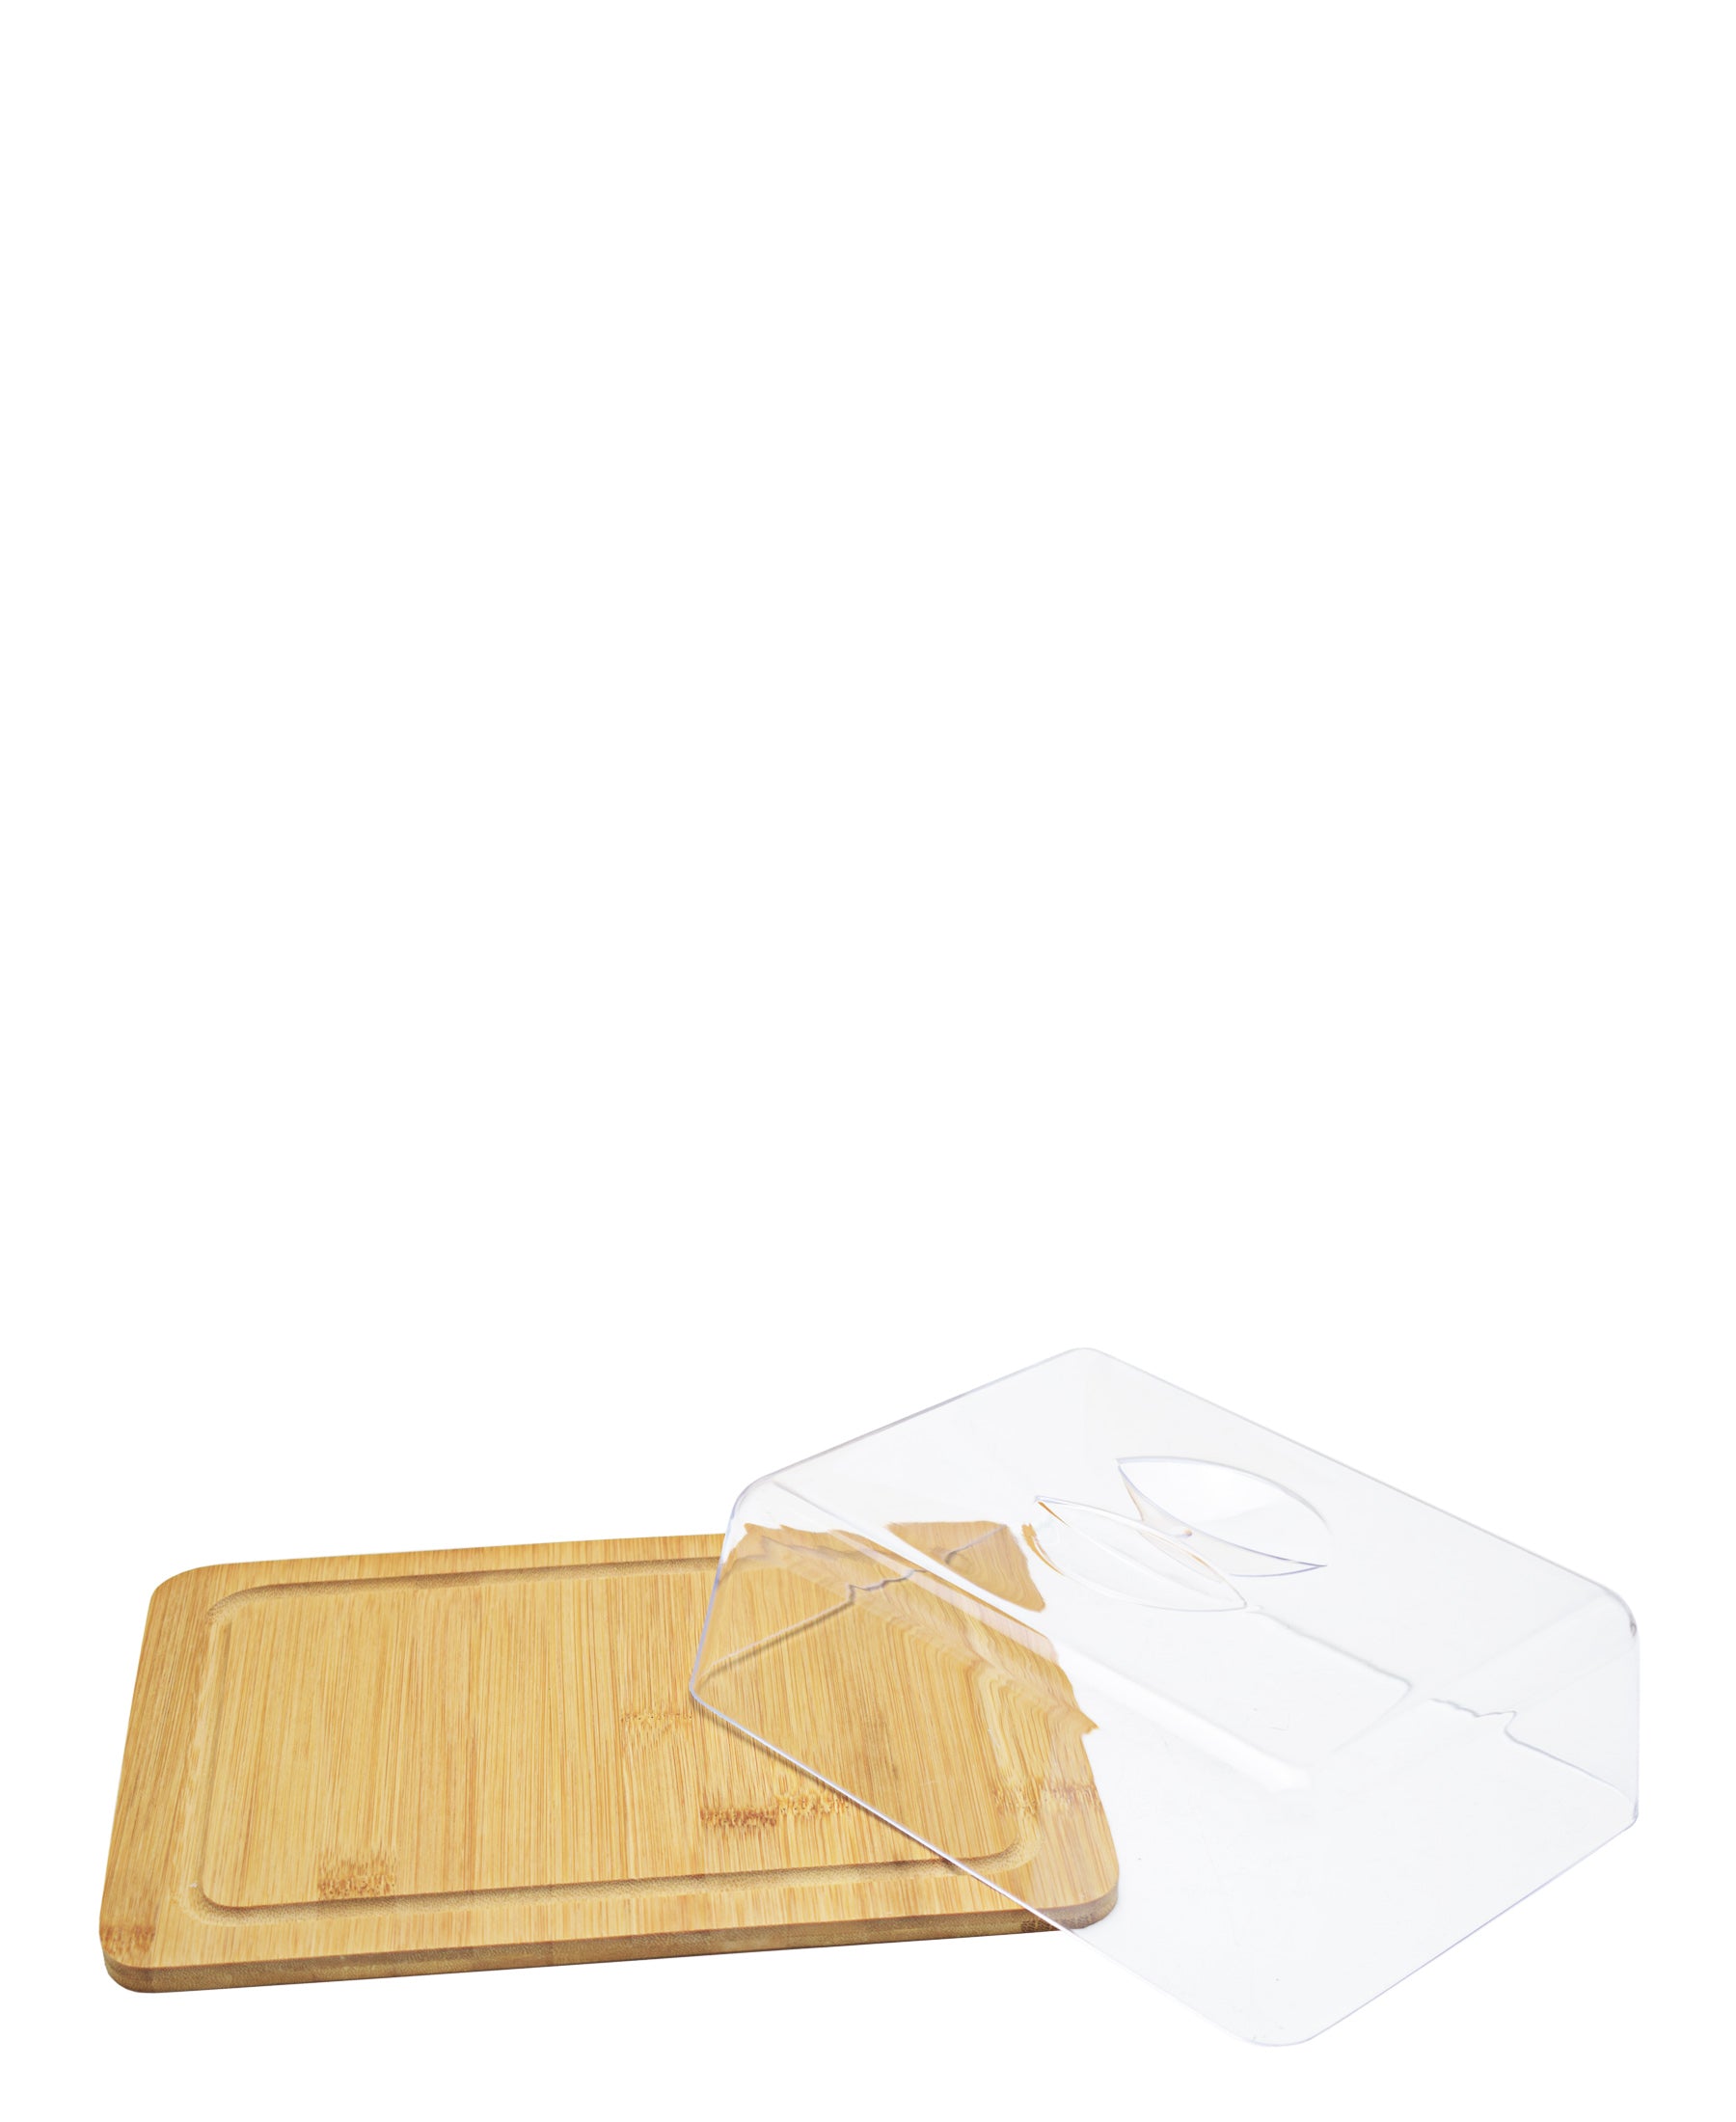 Excellent Houseware Bamboo Cheese Board With Acrylic Cover